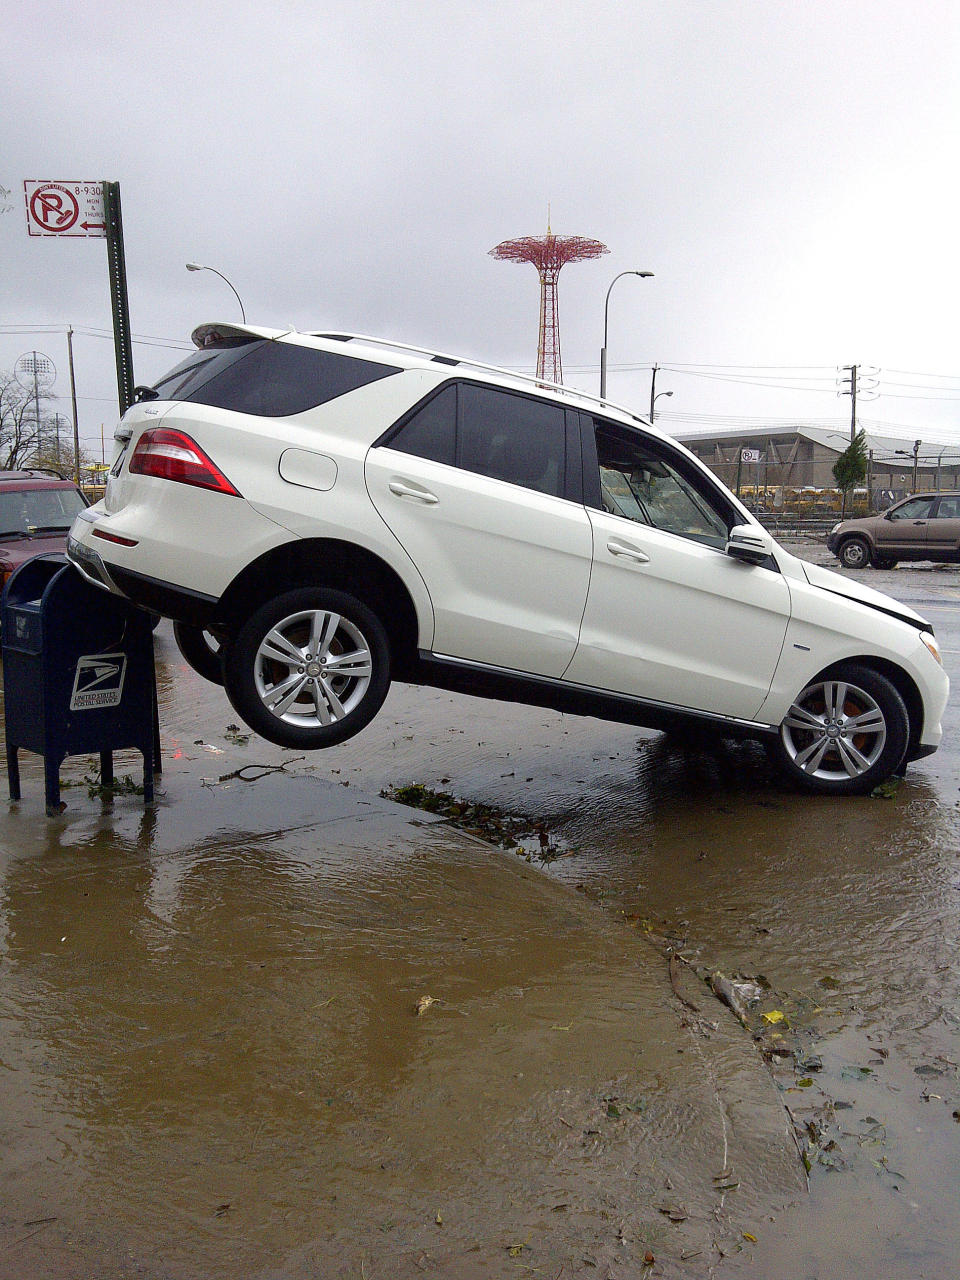 A car is upended on a mailbox on Surf Avenue in Coney Island, N.Y., in the aftermath of Sandy on Tuesday, Oct. 30, 2012. Sandy, the storm that made landfall Monday, caused multiple fatalities, halted mass transit and cut power to more than 6 million homes and businesses. (AP Photo/Ralph Russo)